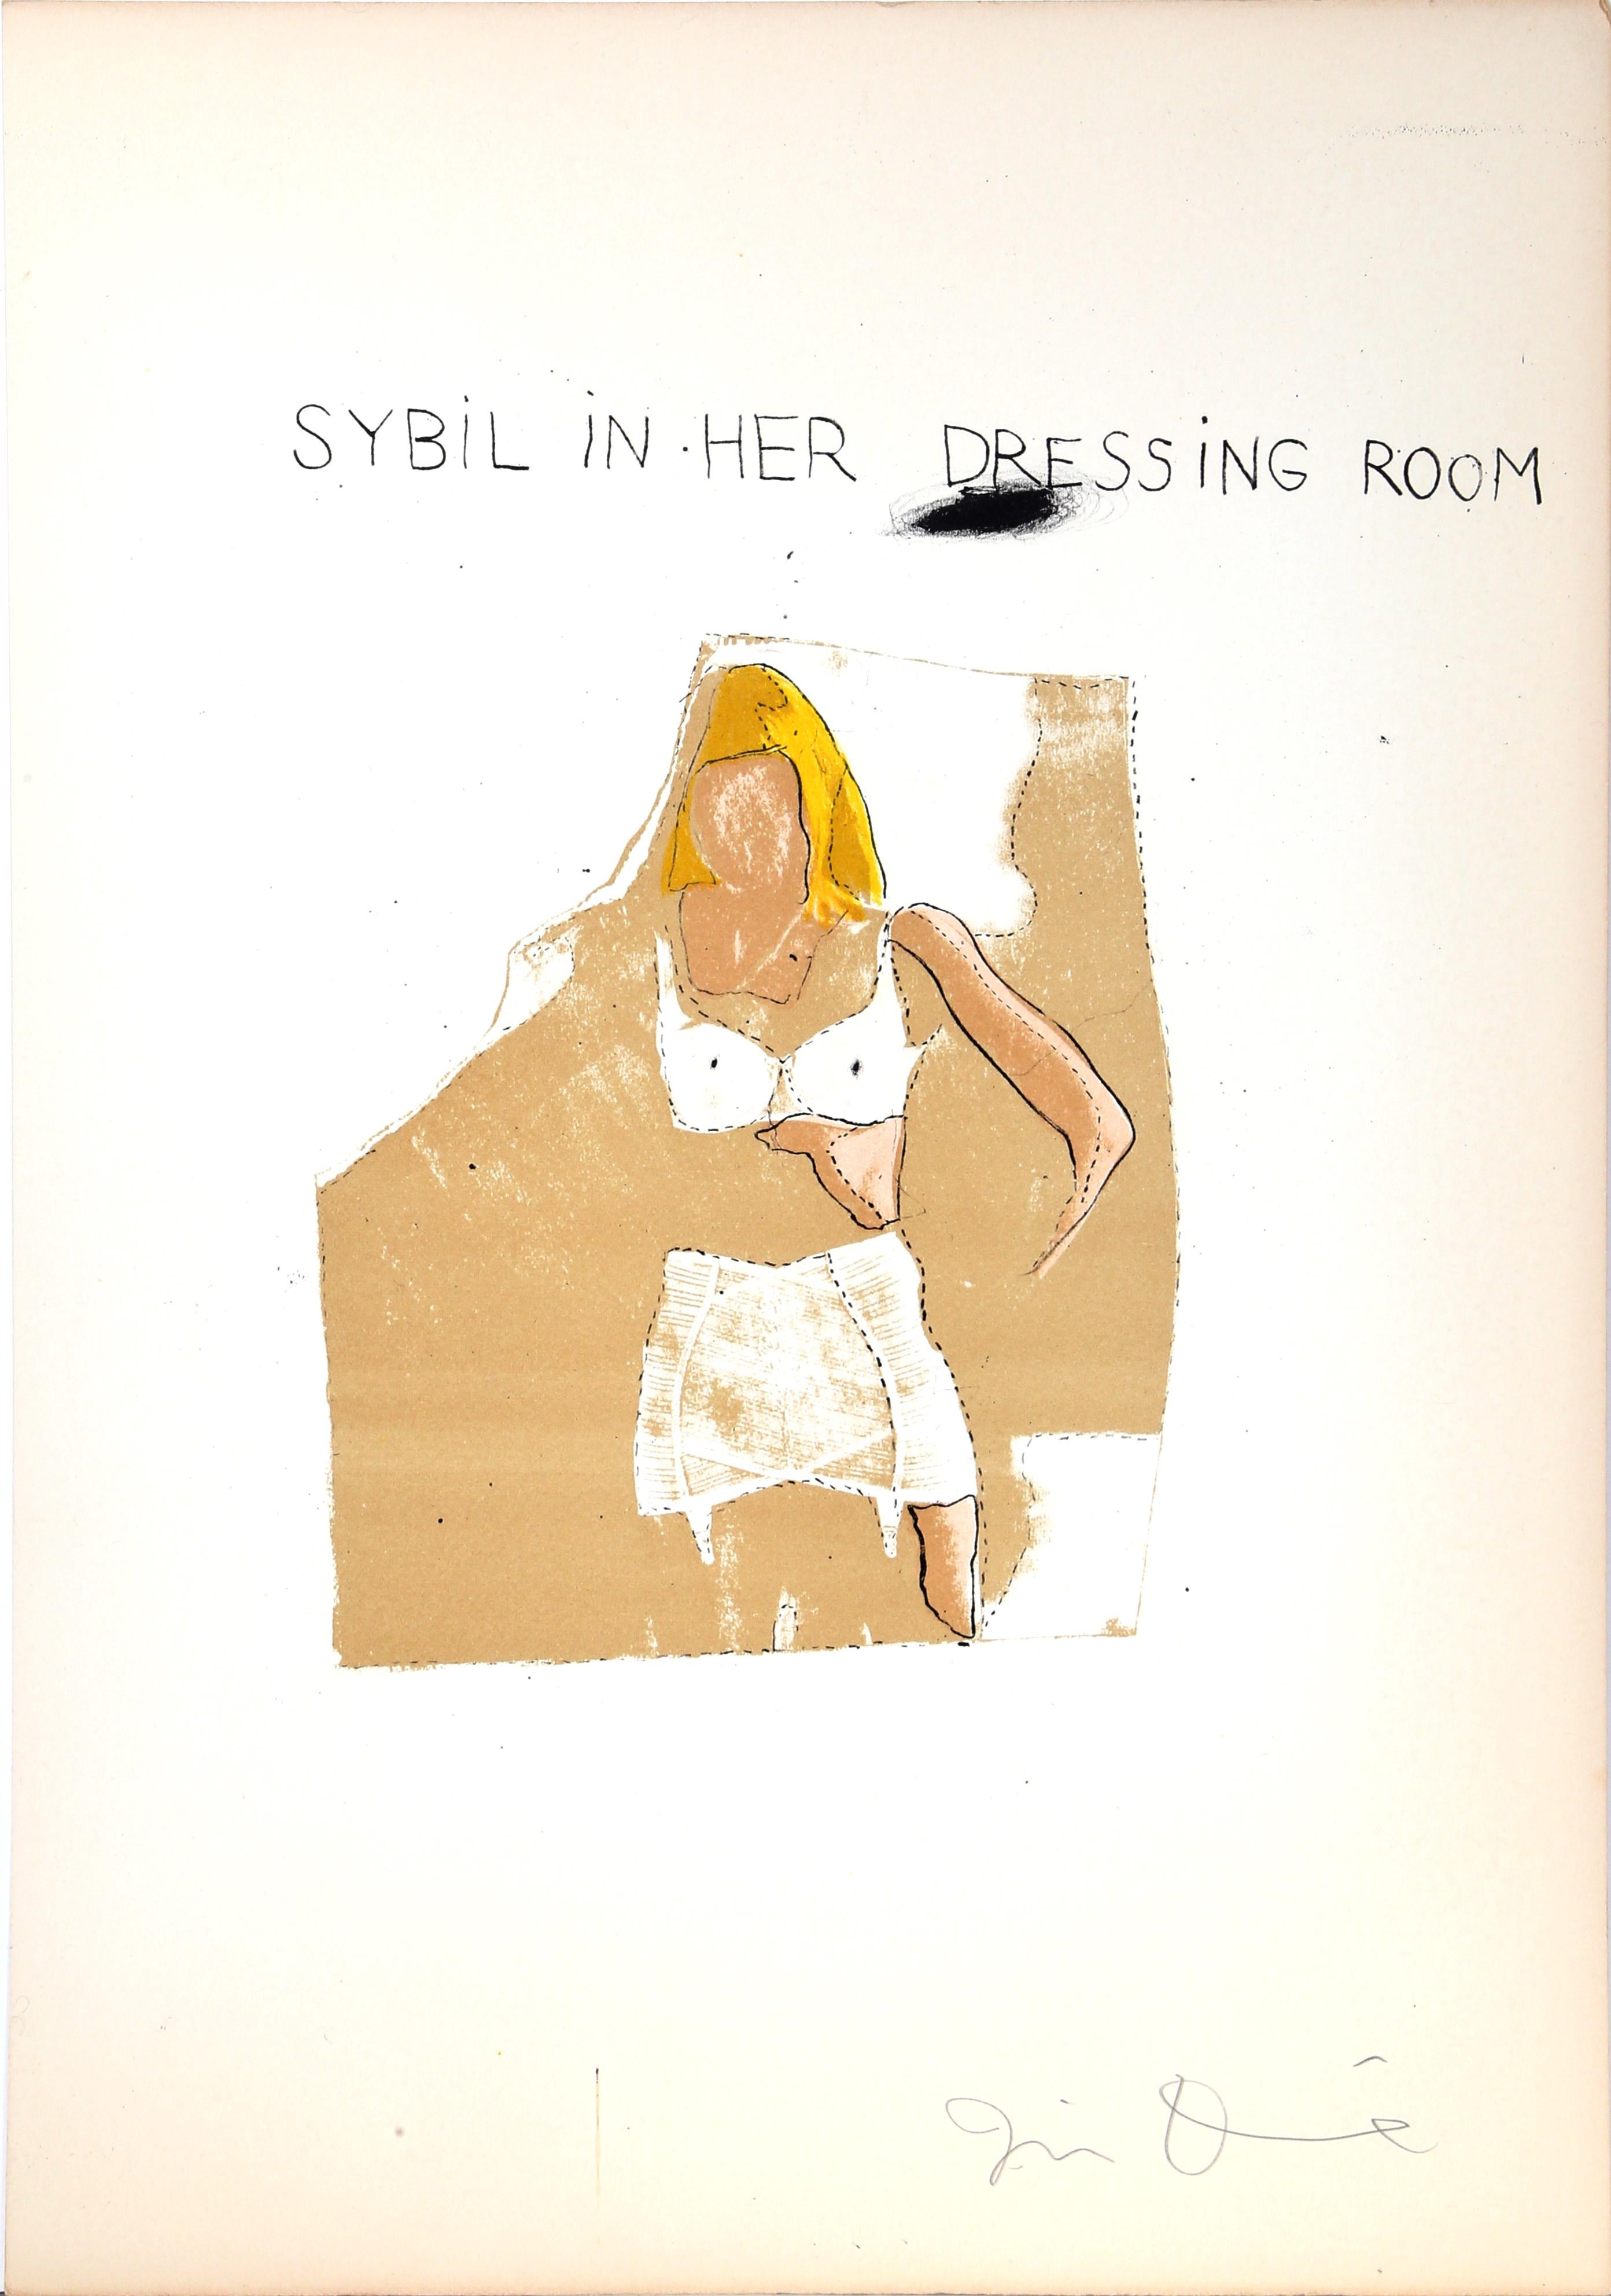 A lithograph by Jim Dine depicting a blond woman in a state of undress. Above her, the text reads "Sybil in her dressing room" in all capital letters. This print is signed in pencil by the artist.

Sybil in Her Dressing Room
Jim Dine, American